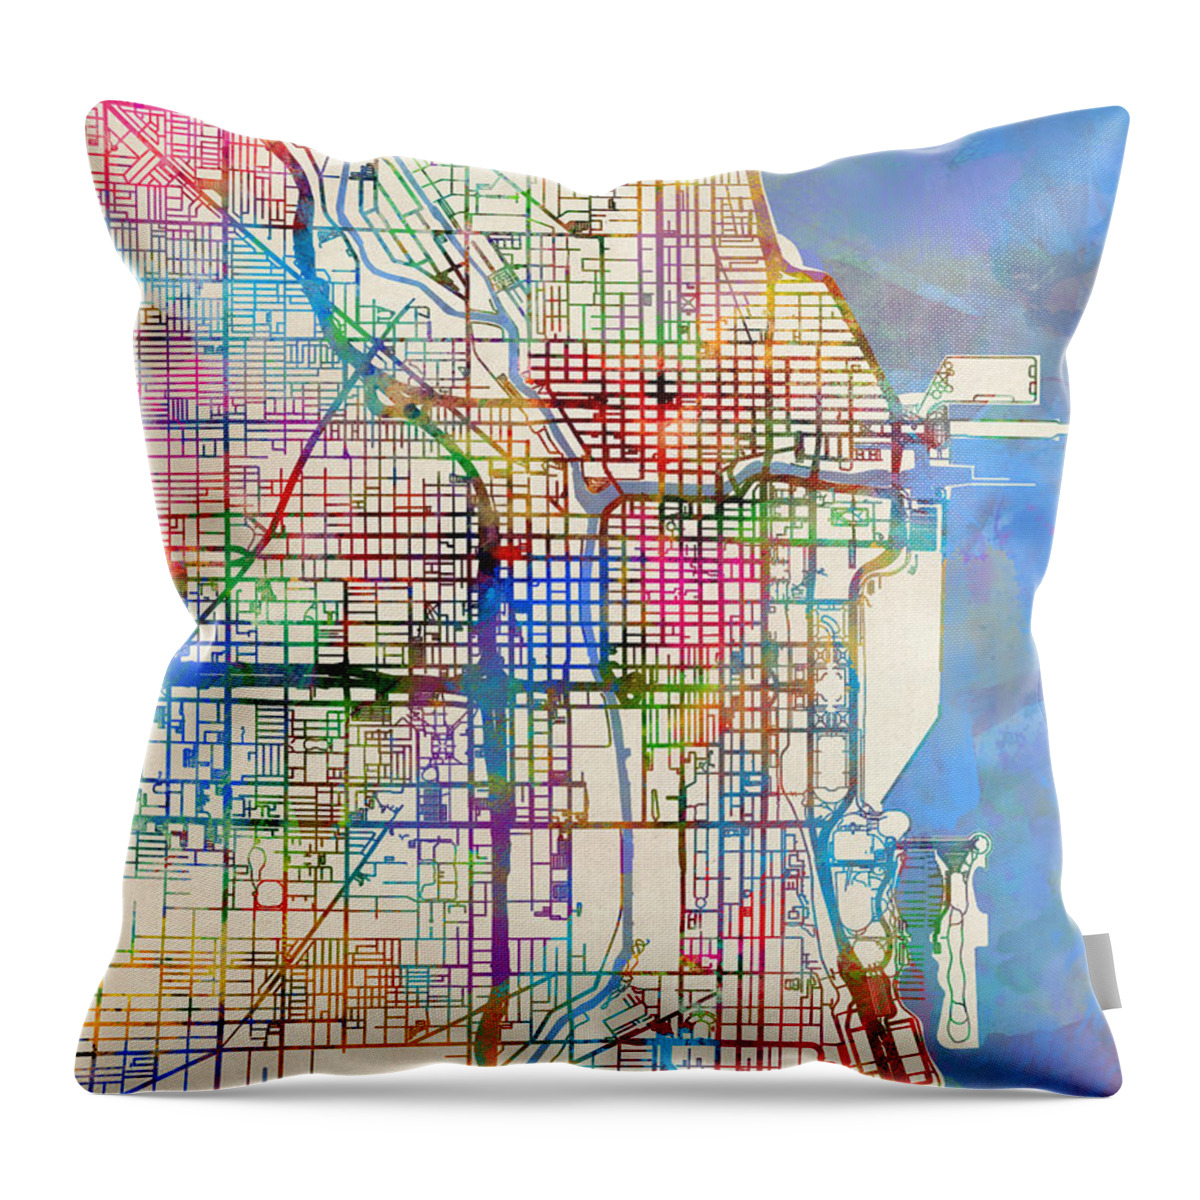 Chicago Throw Pillow featuring the digital art Chicago City Street Map #5 by Michael Tompsett